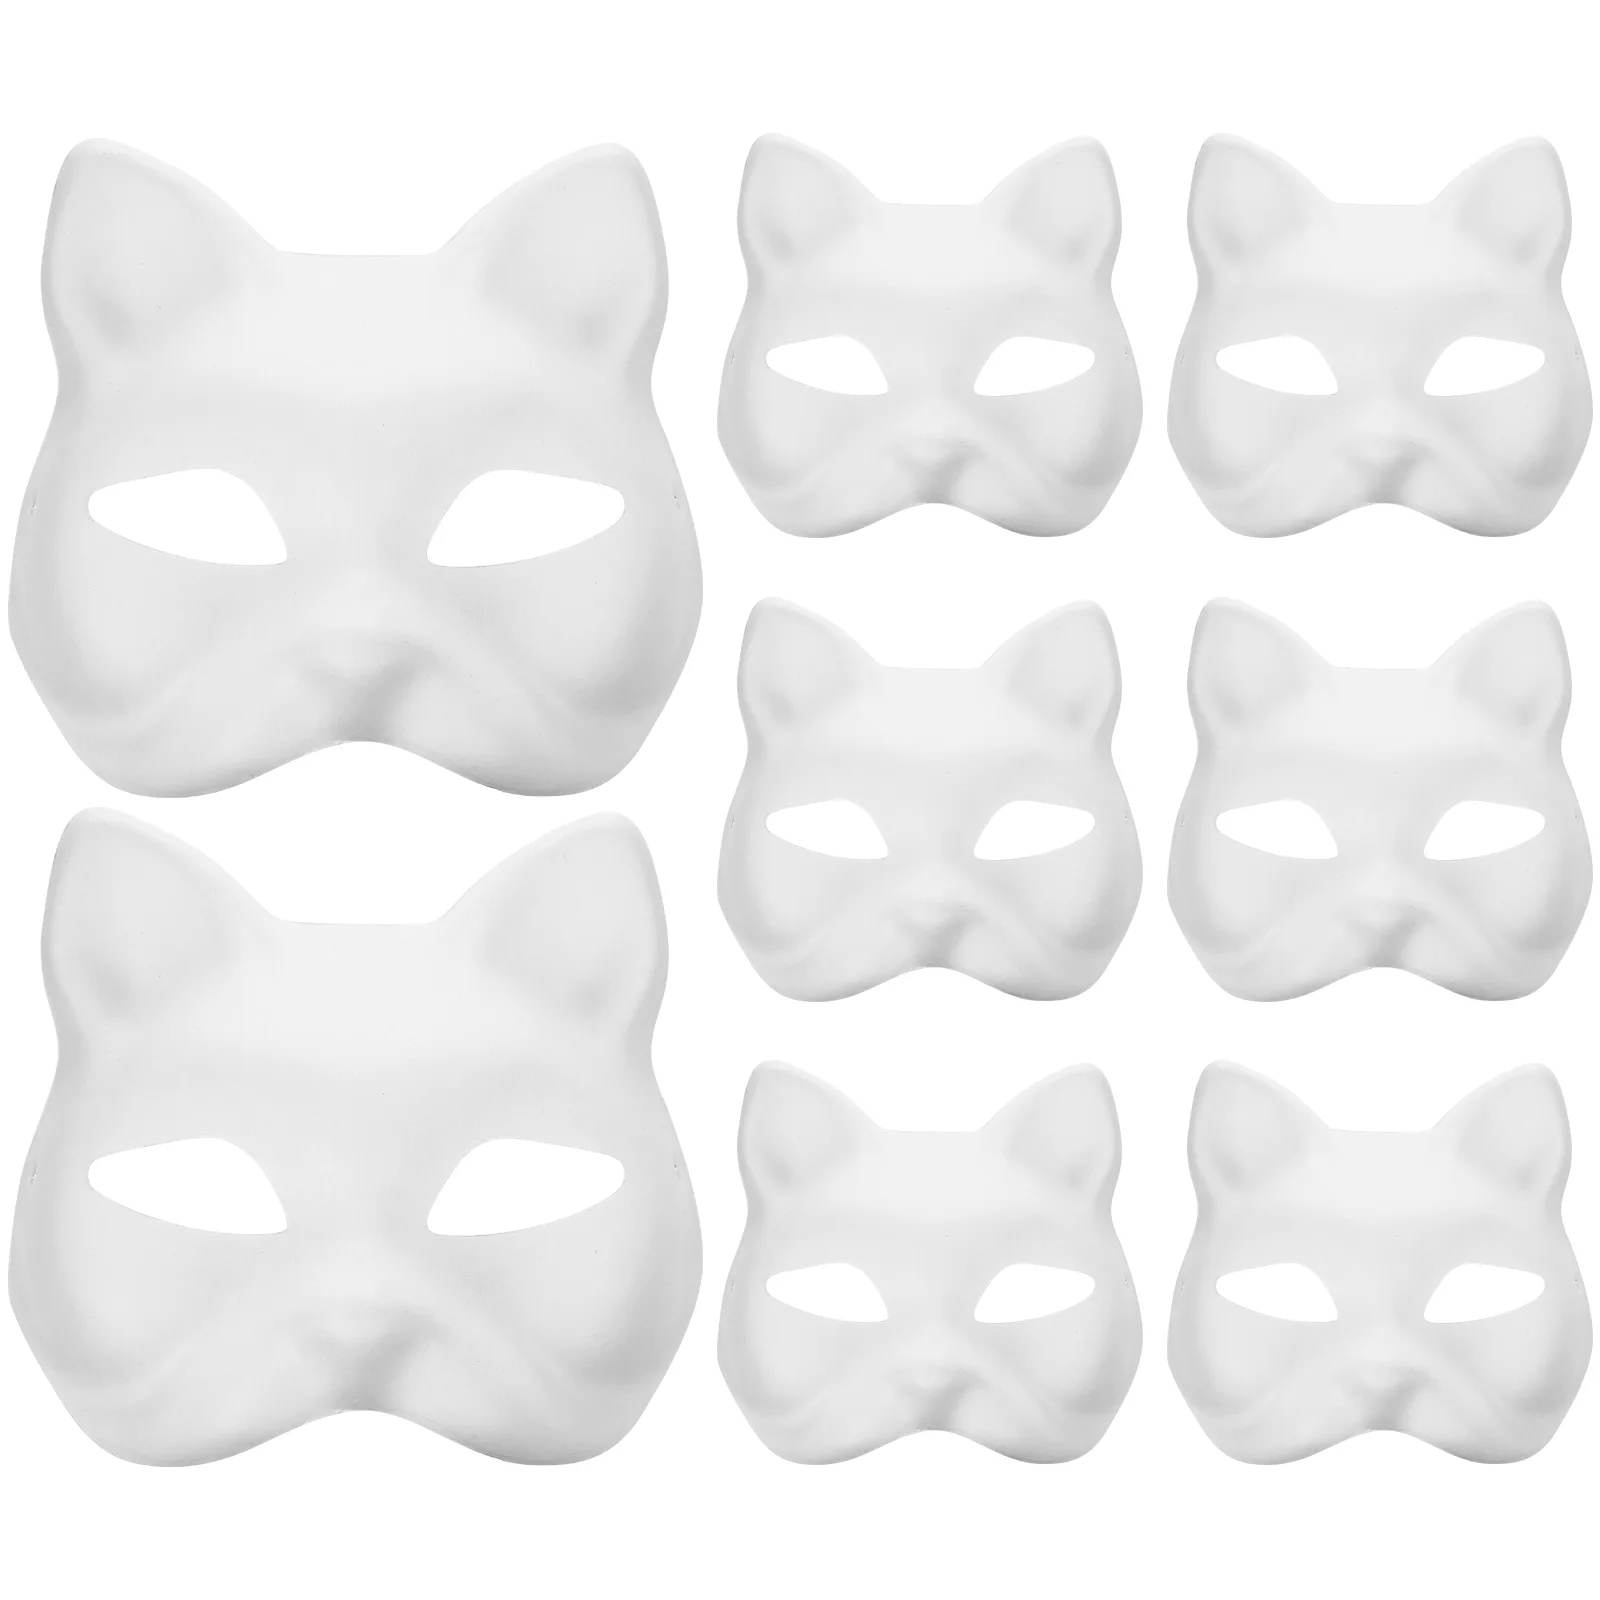 

8 Pcs Pulp Blank Mask DIY Unpainted Masquerade Props Graffiti White Party Paper Supplies Lovers Paintable Cat Animal